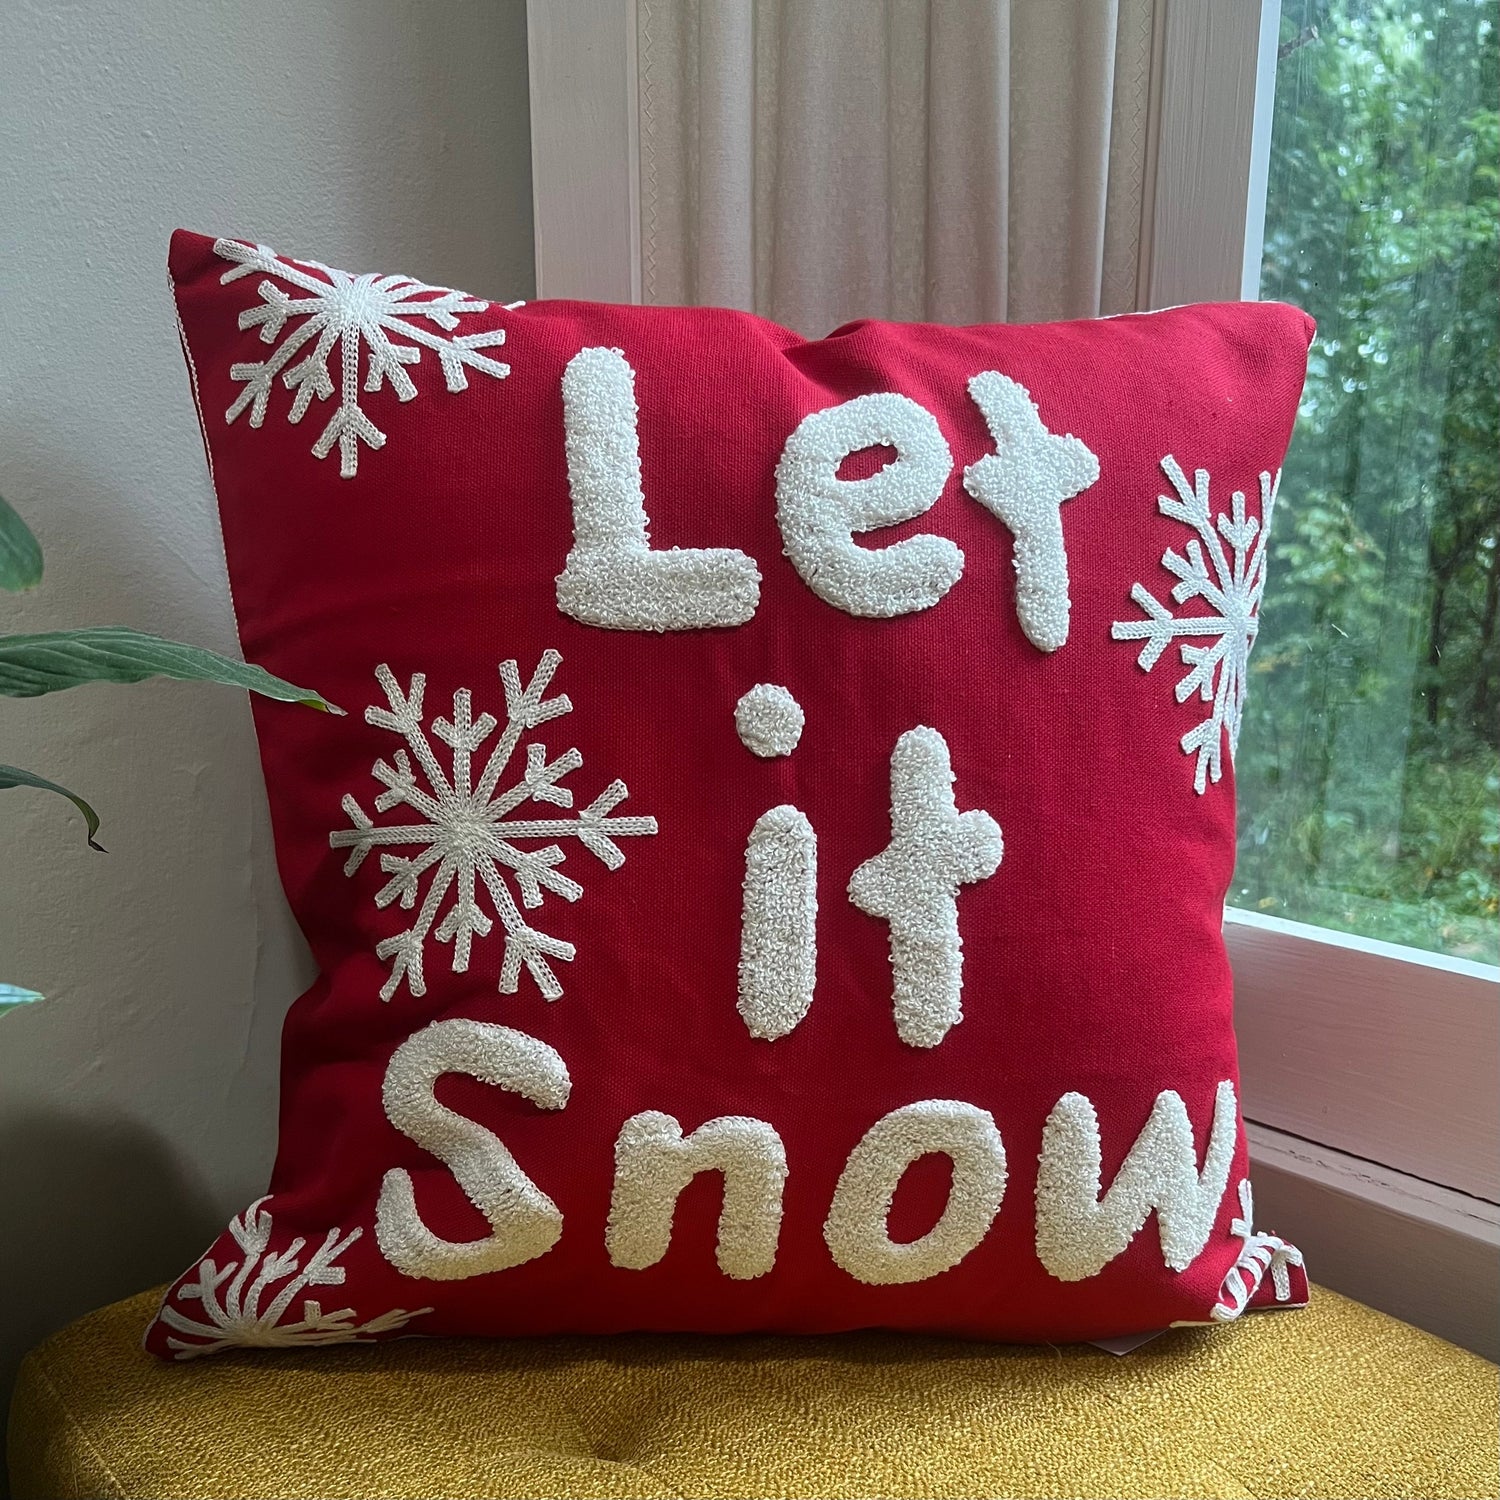 Red and White “Let it Snow”